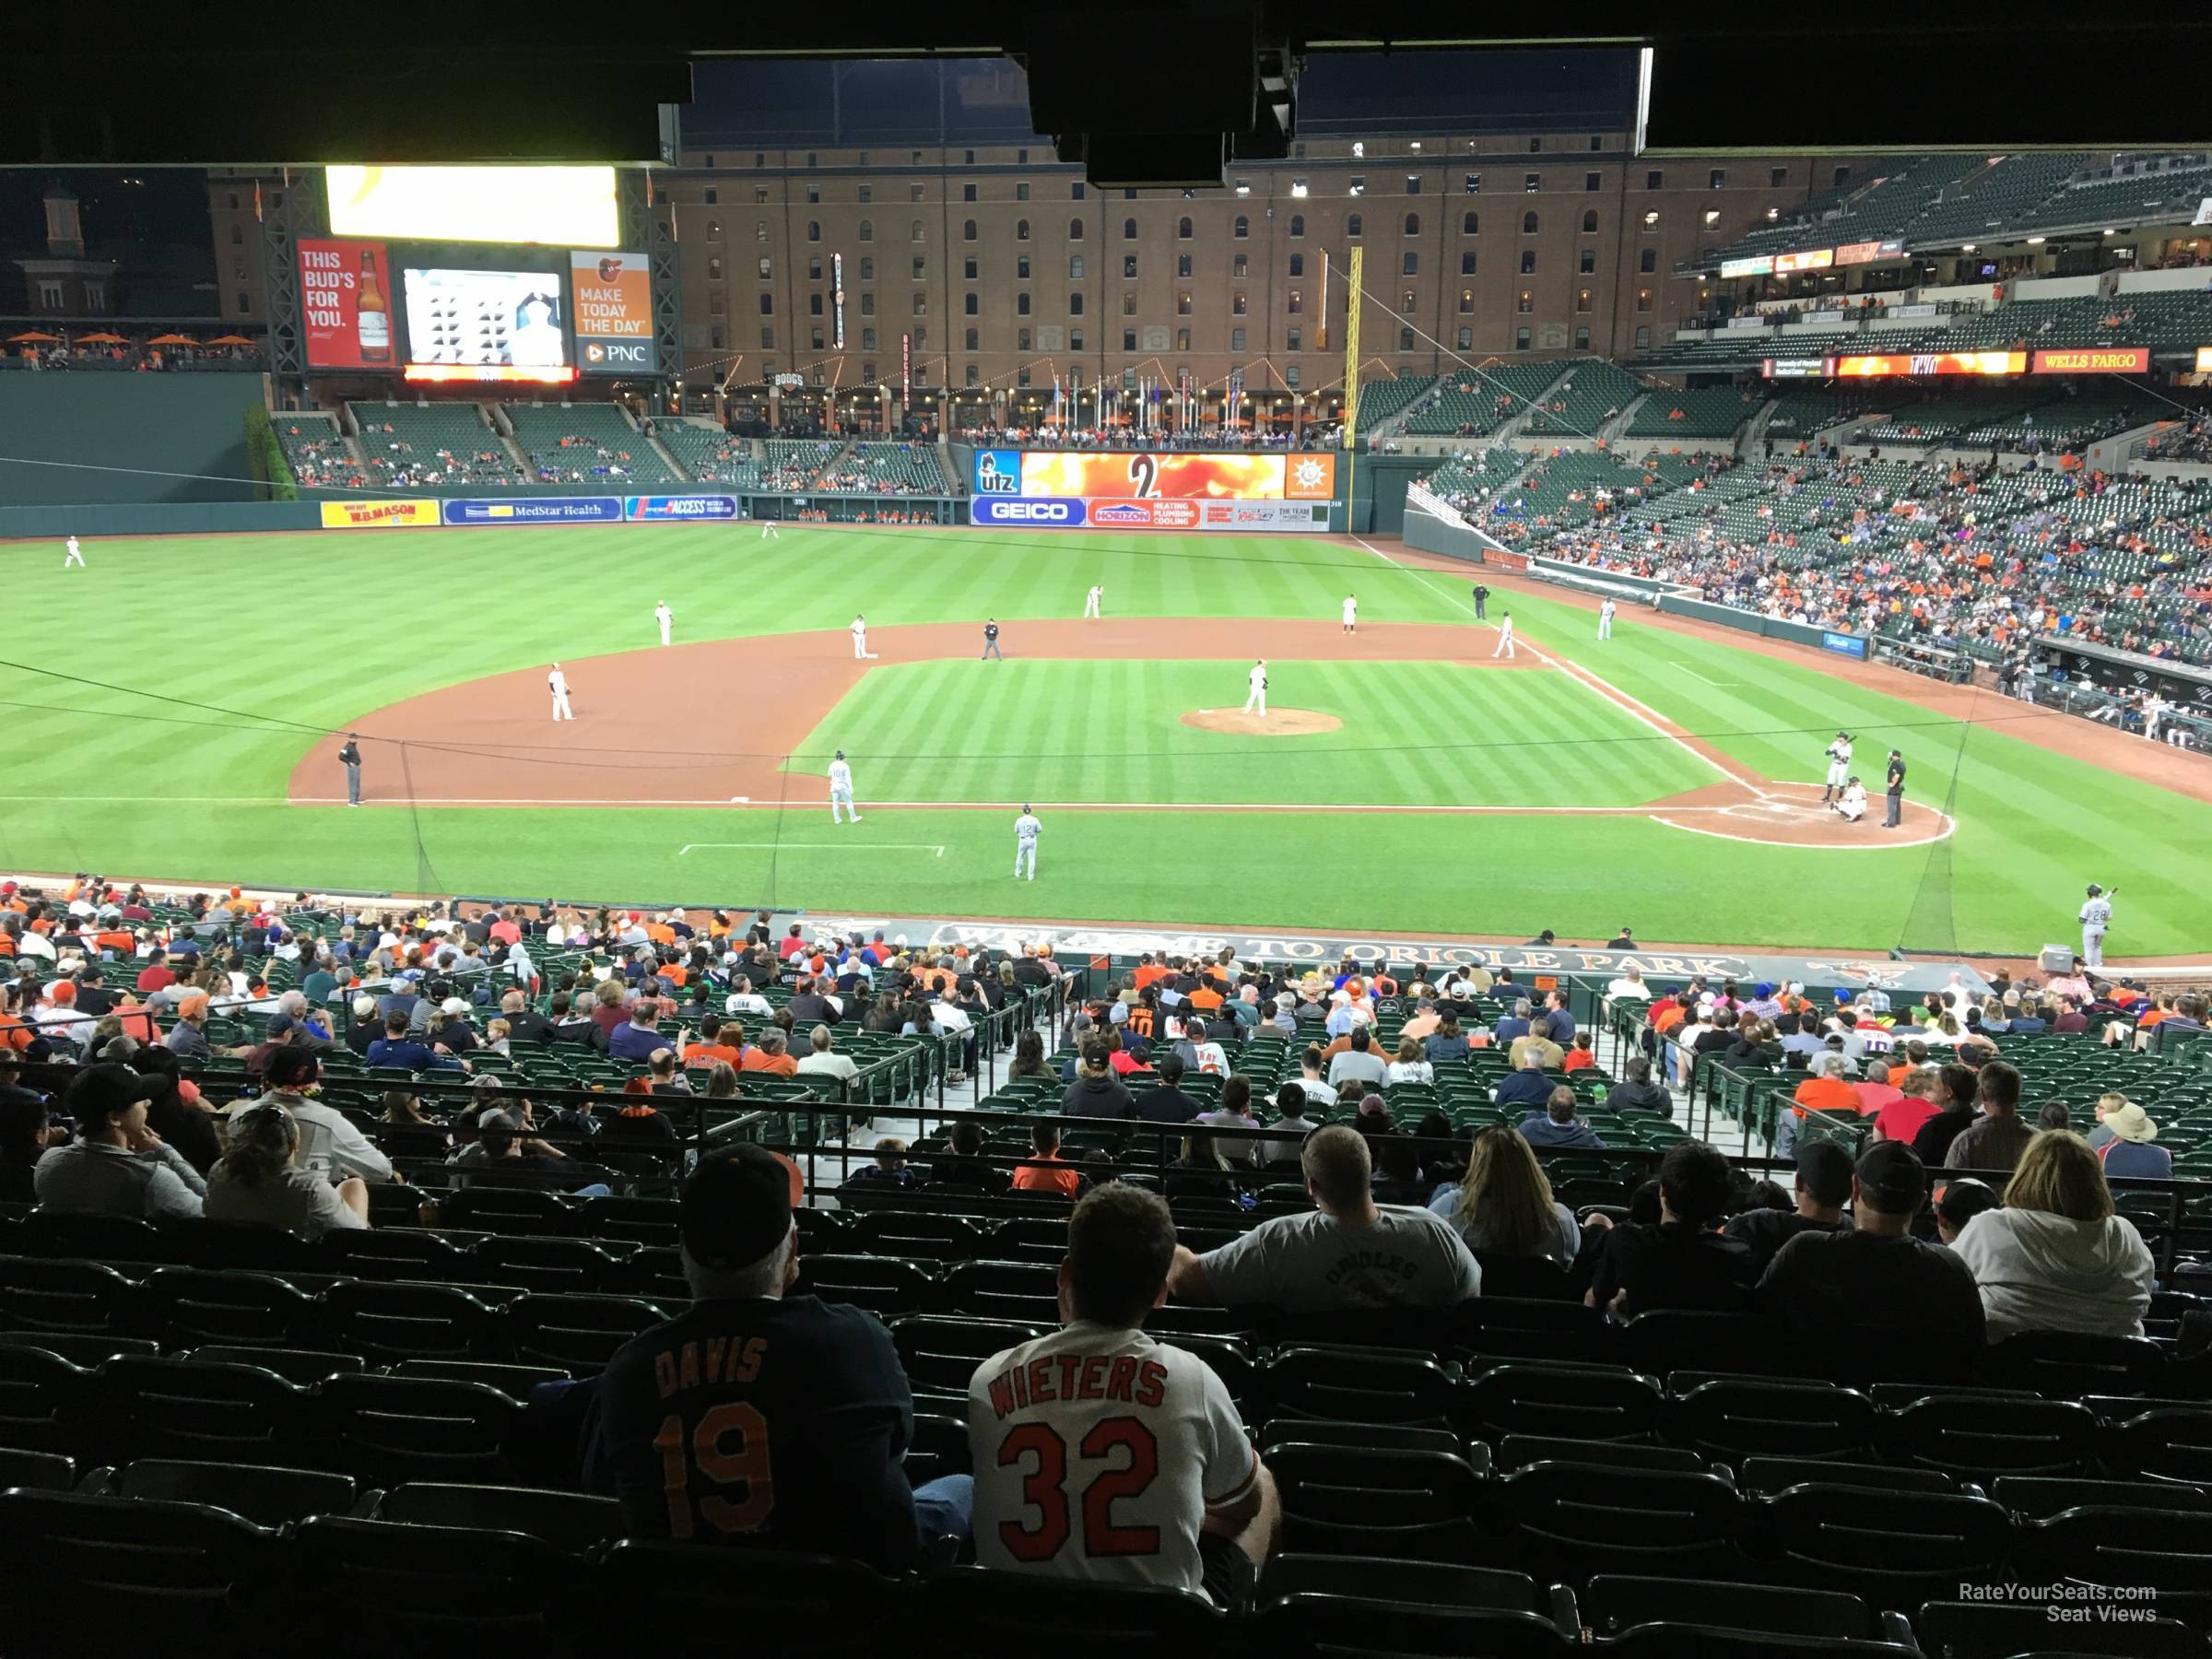 Section 49 at Oriole Park 